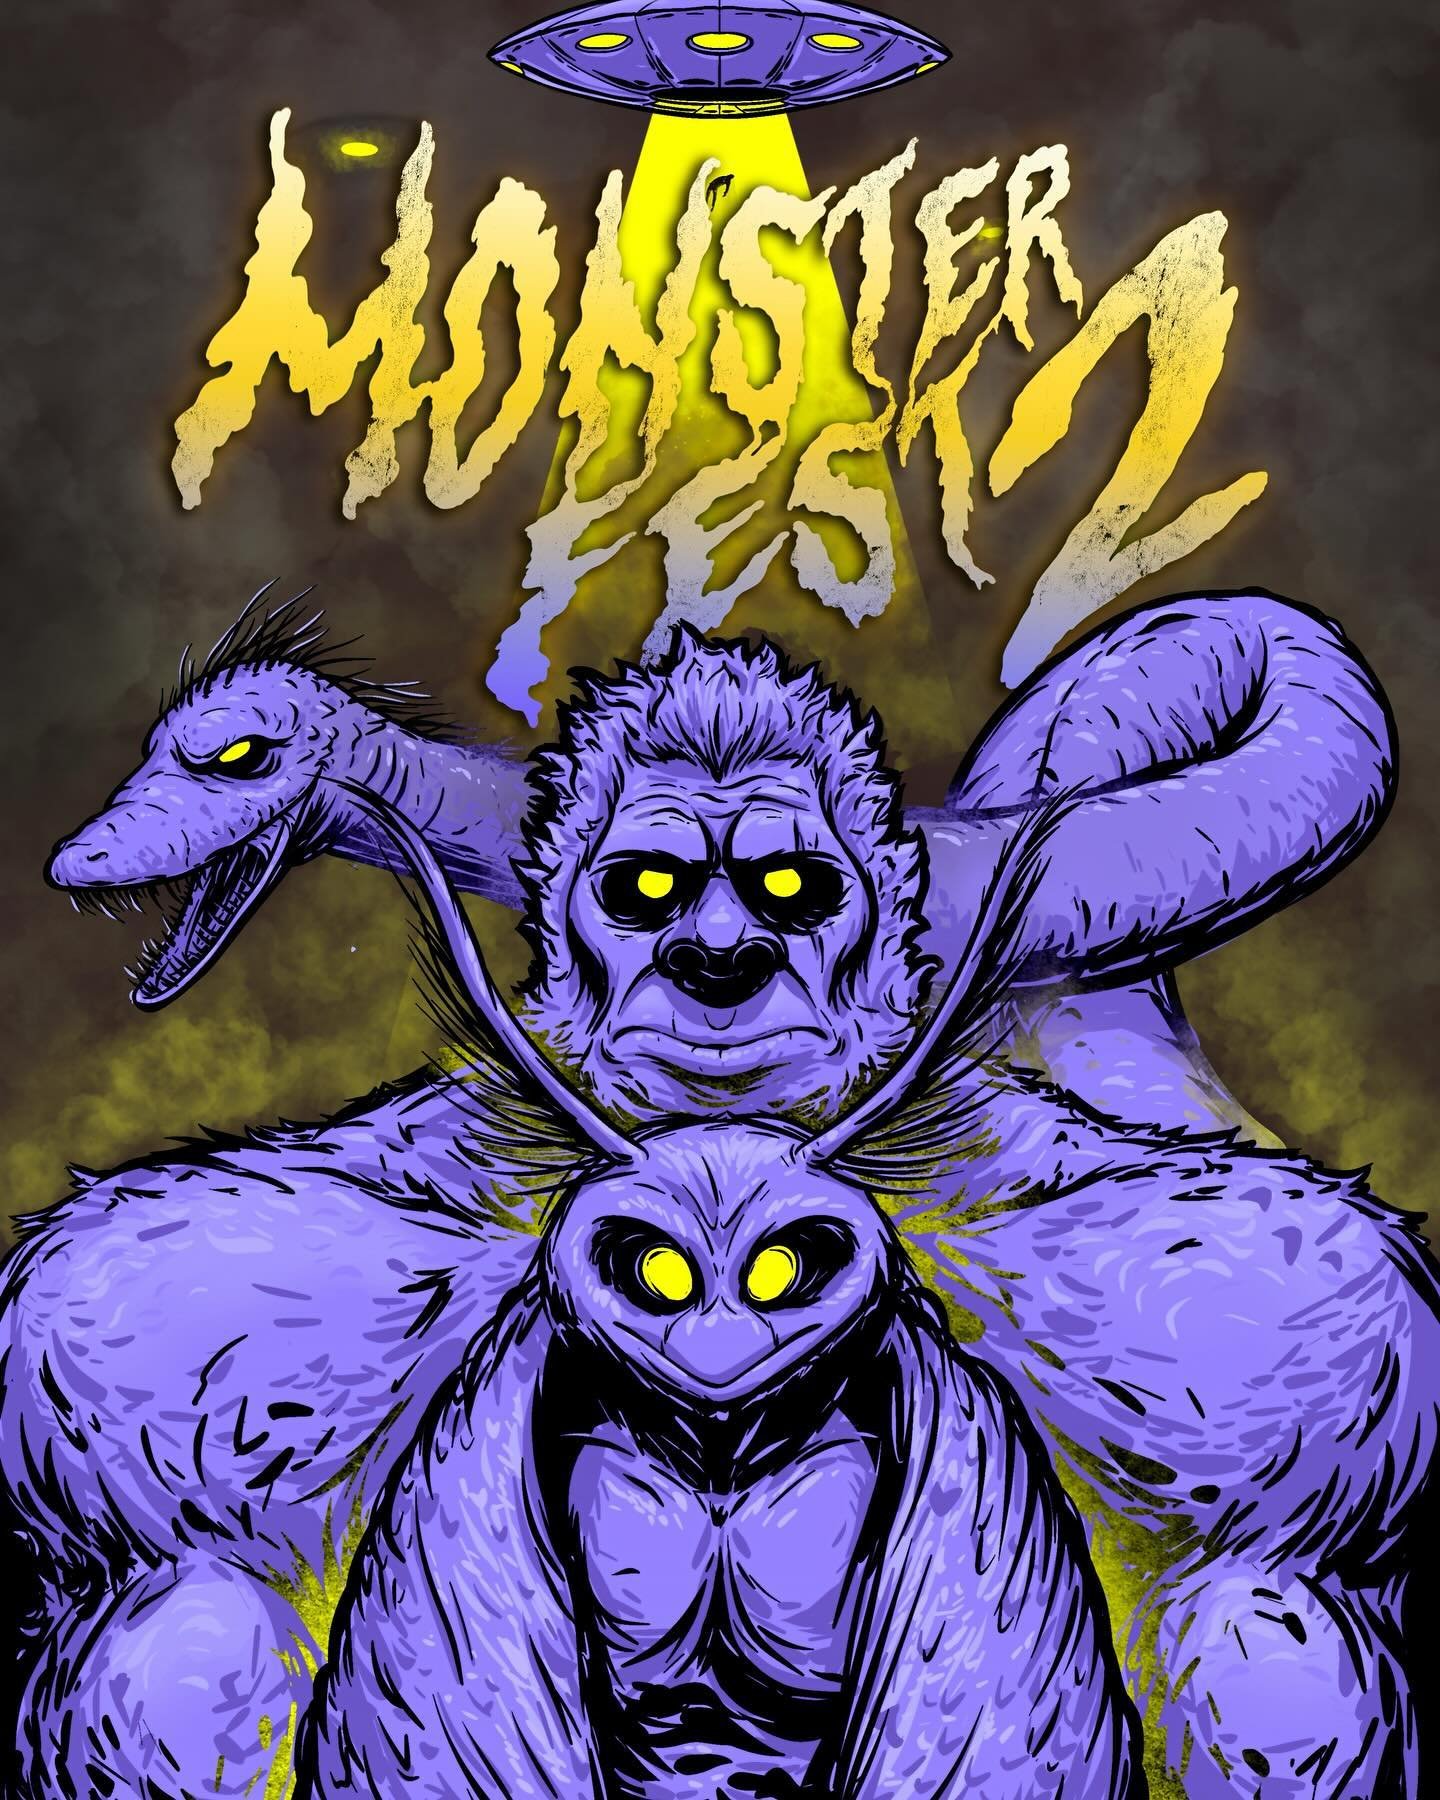 🚨POSTER REVEAL🚨Check out our official Monster Fest 2 poster by Jeff Kunze! Join us in Canton OH on 6/29 to score exclusive event merch with this killer design. Tickets at stmmonsterfest.com! 

#monsters #event #art #bigfoot #sasquatch #dogman #ufos